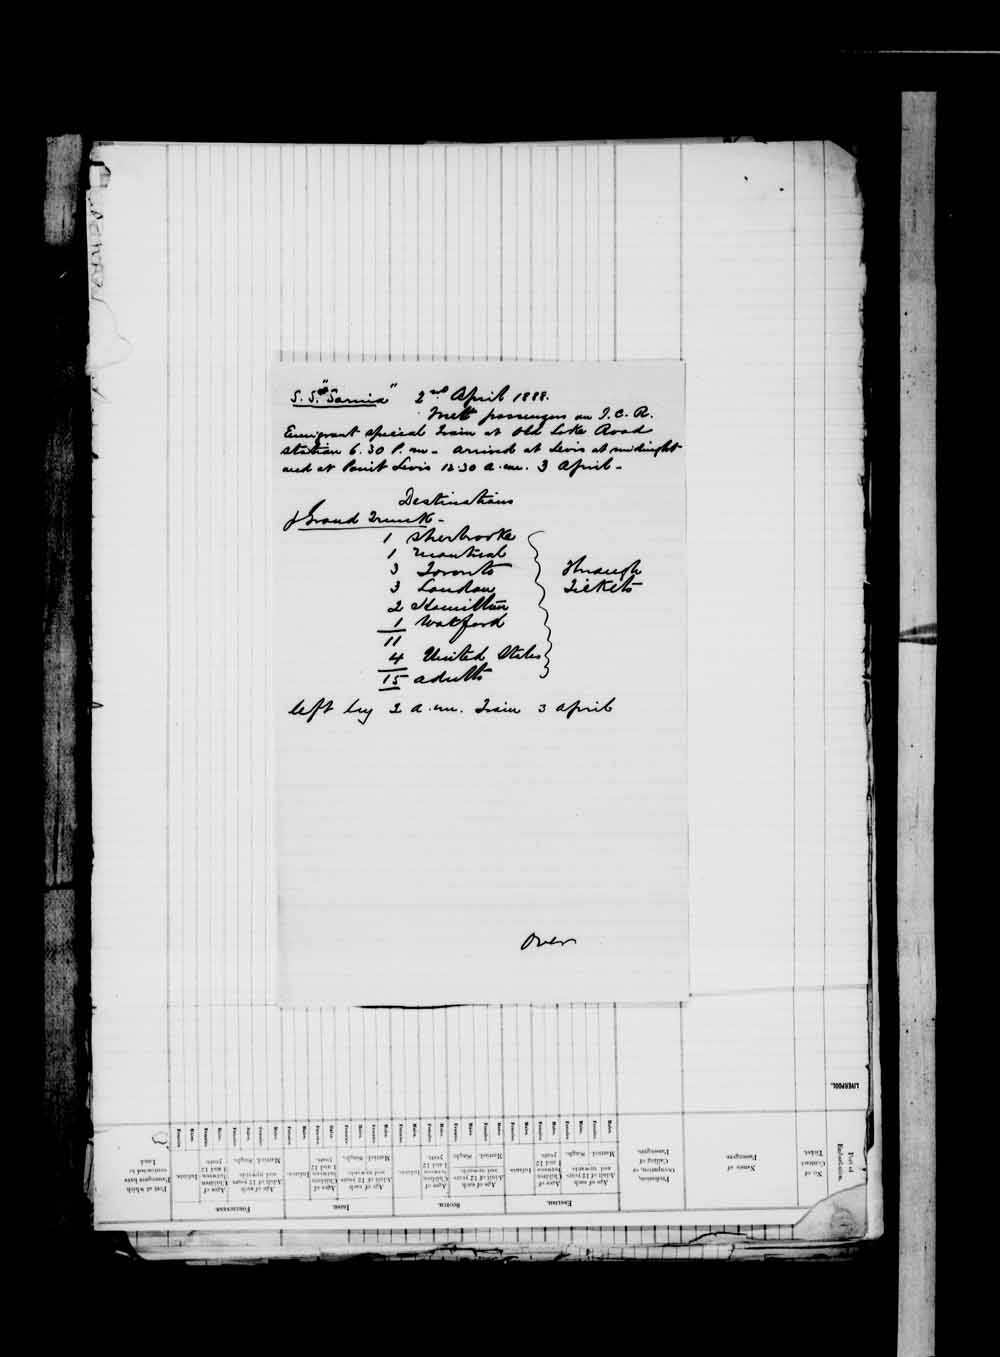 Digitized page of Passenger Lists for Image No.: e003674505